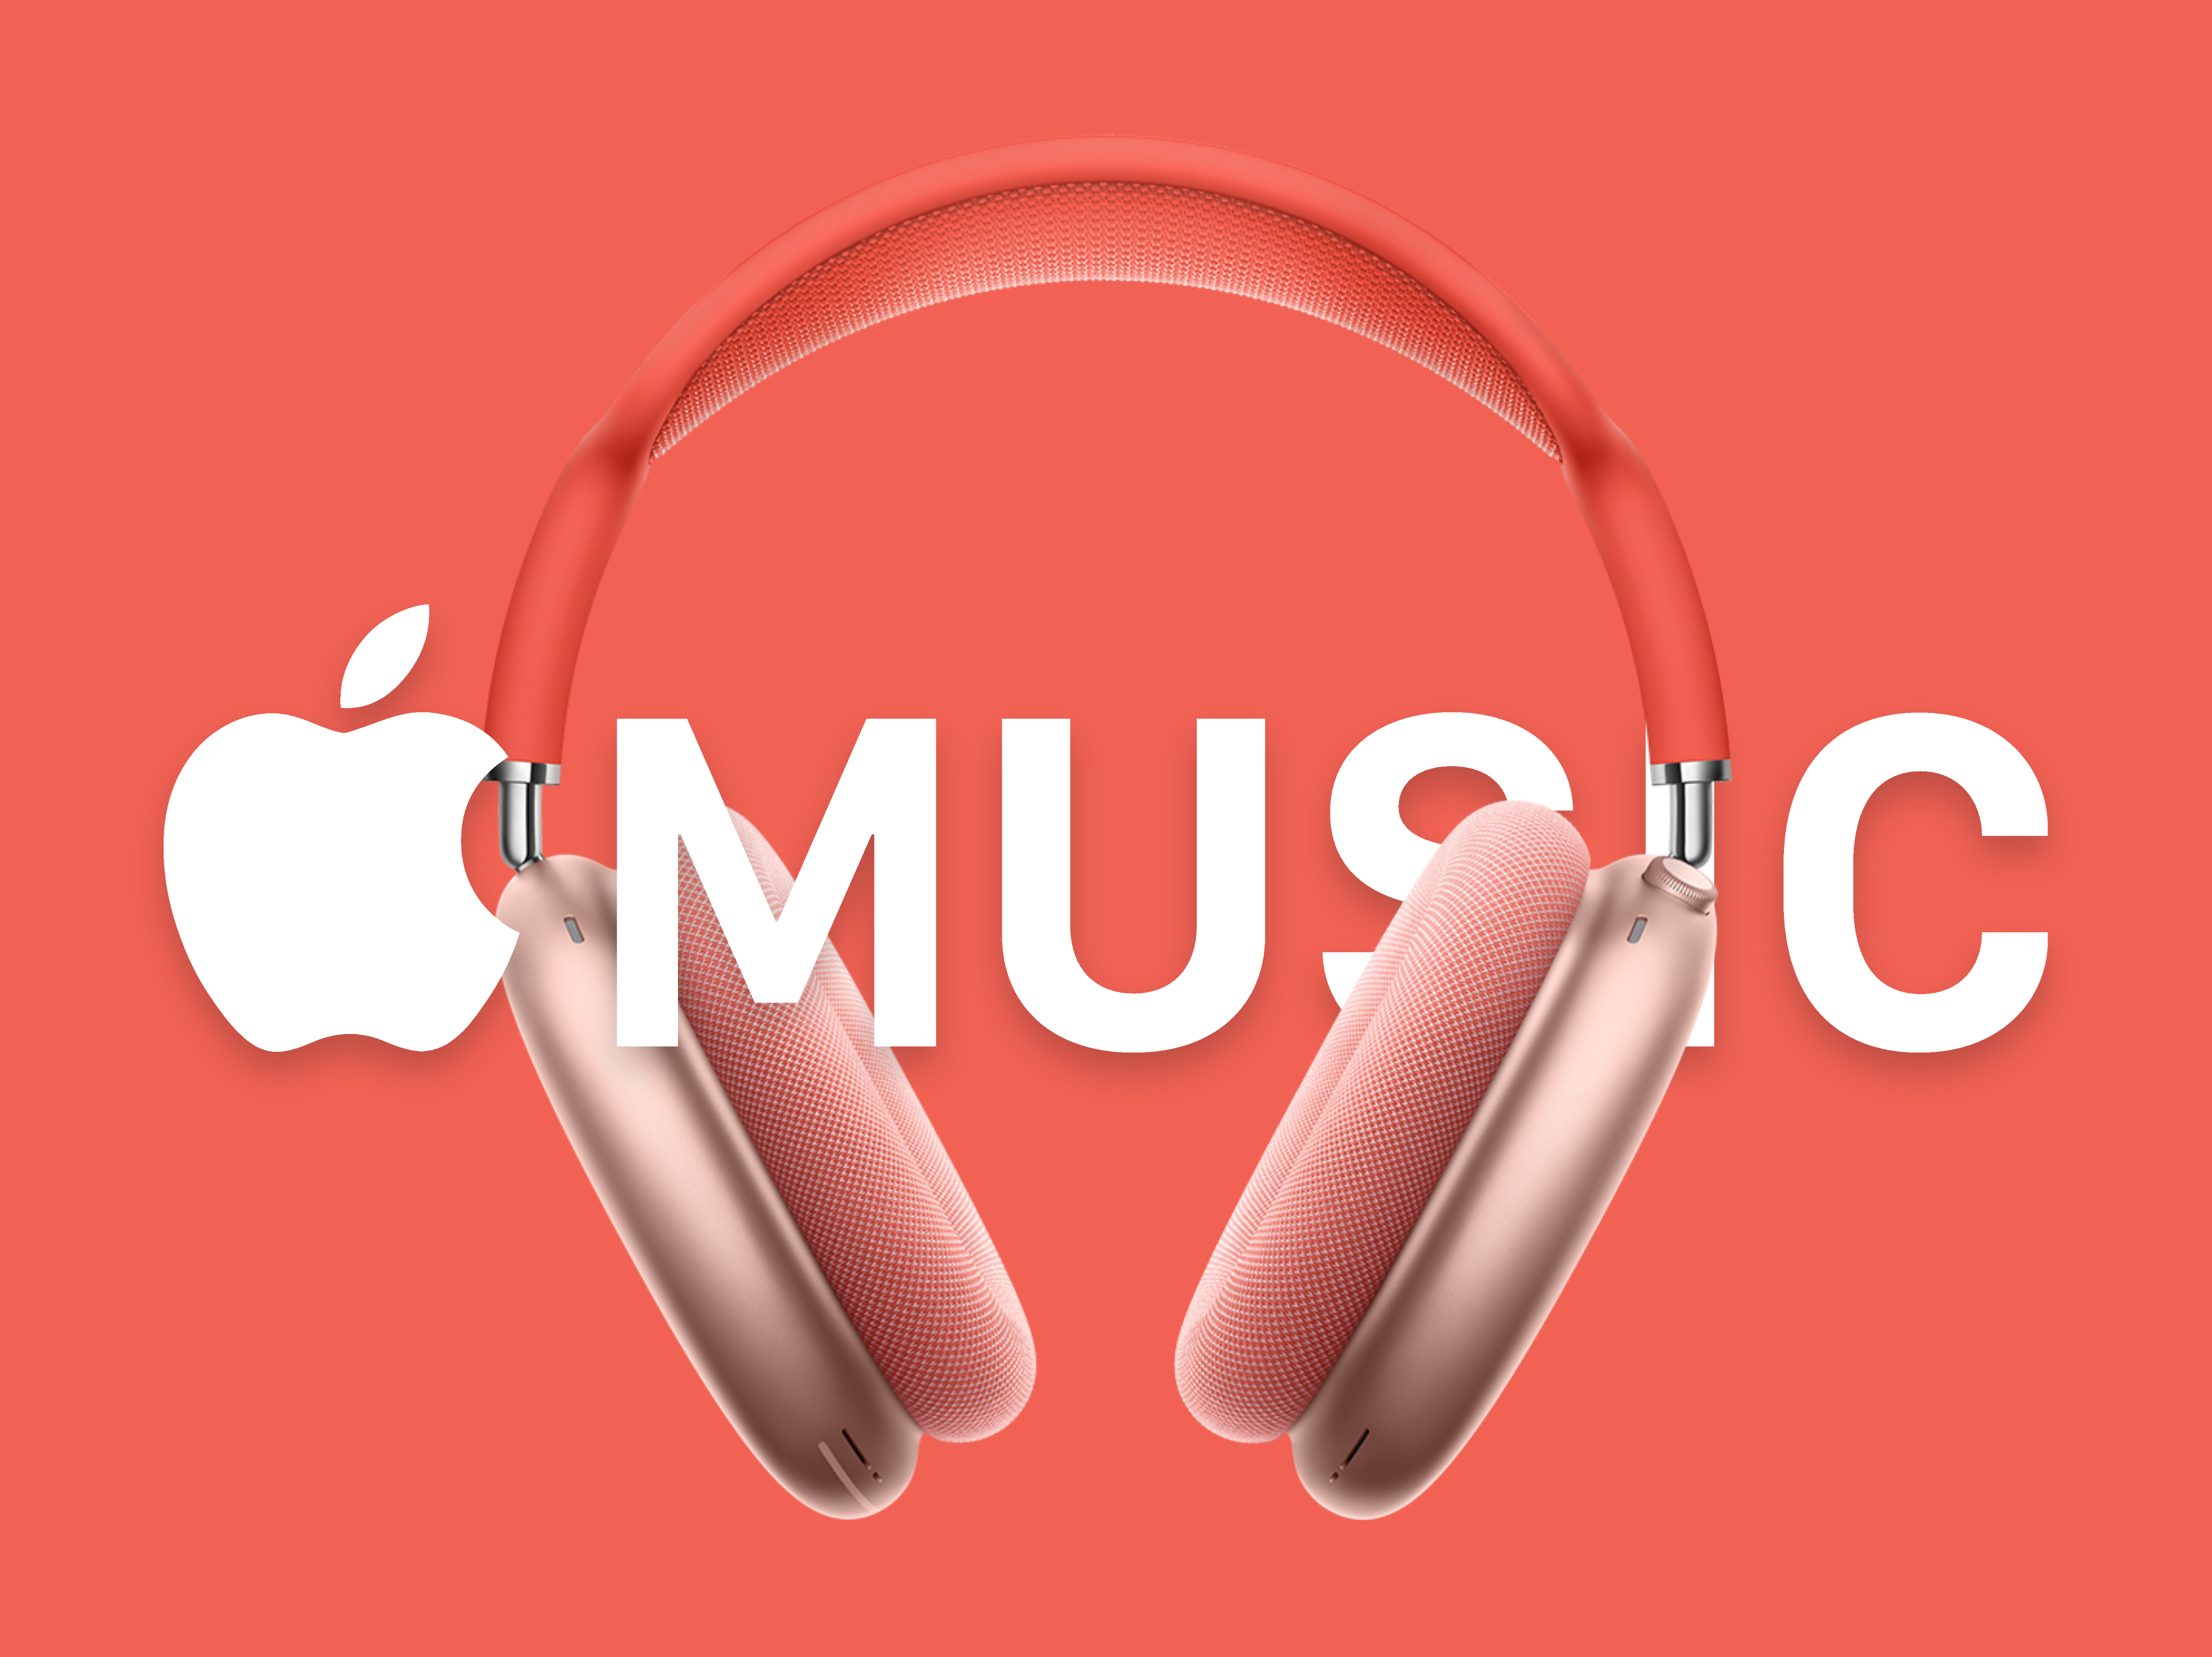 Apple’s lossless audio is coming in June but AirPods don’t support the new feature